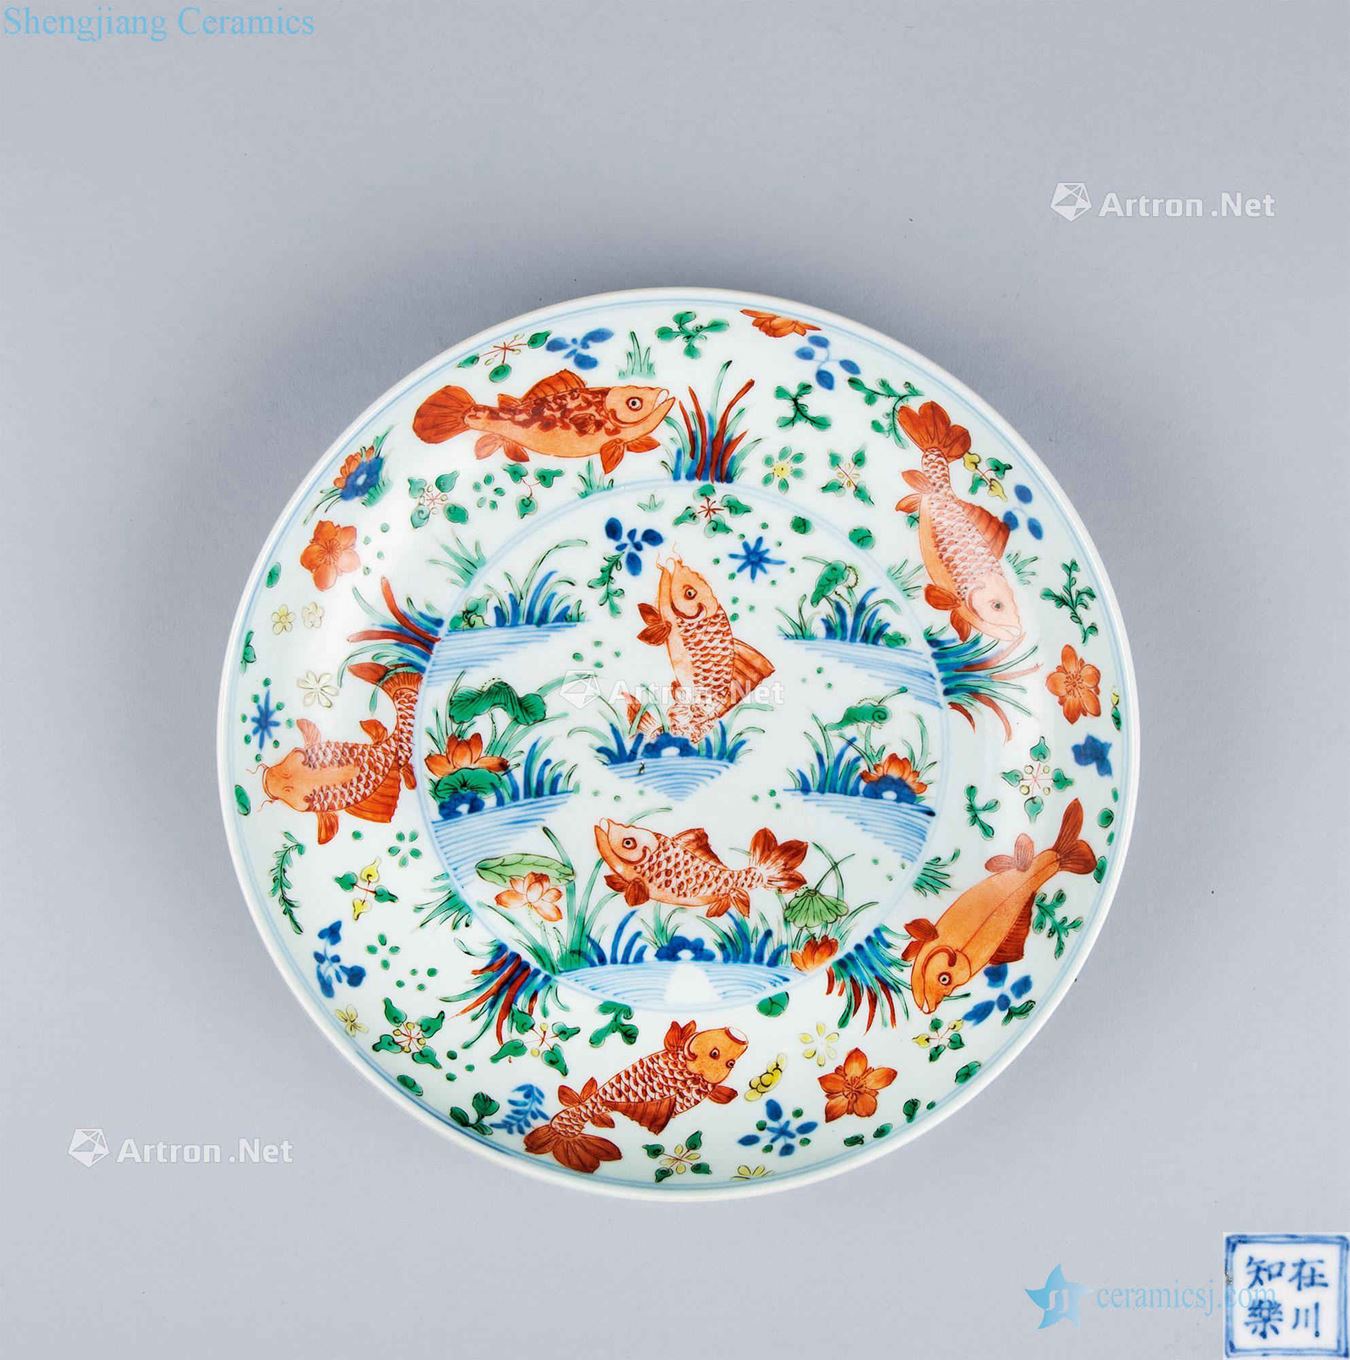 In the qing dynasty (1644-1911), colorful fish and algae tray